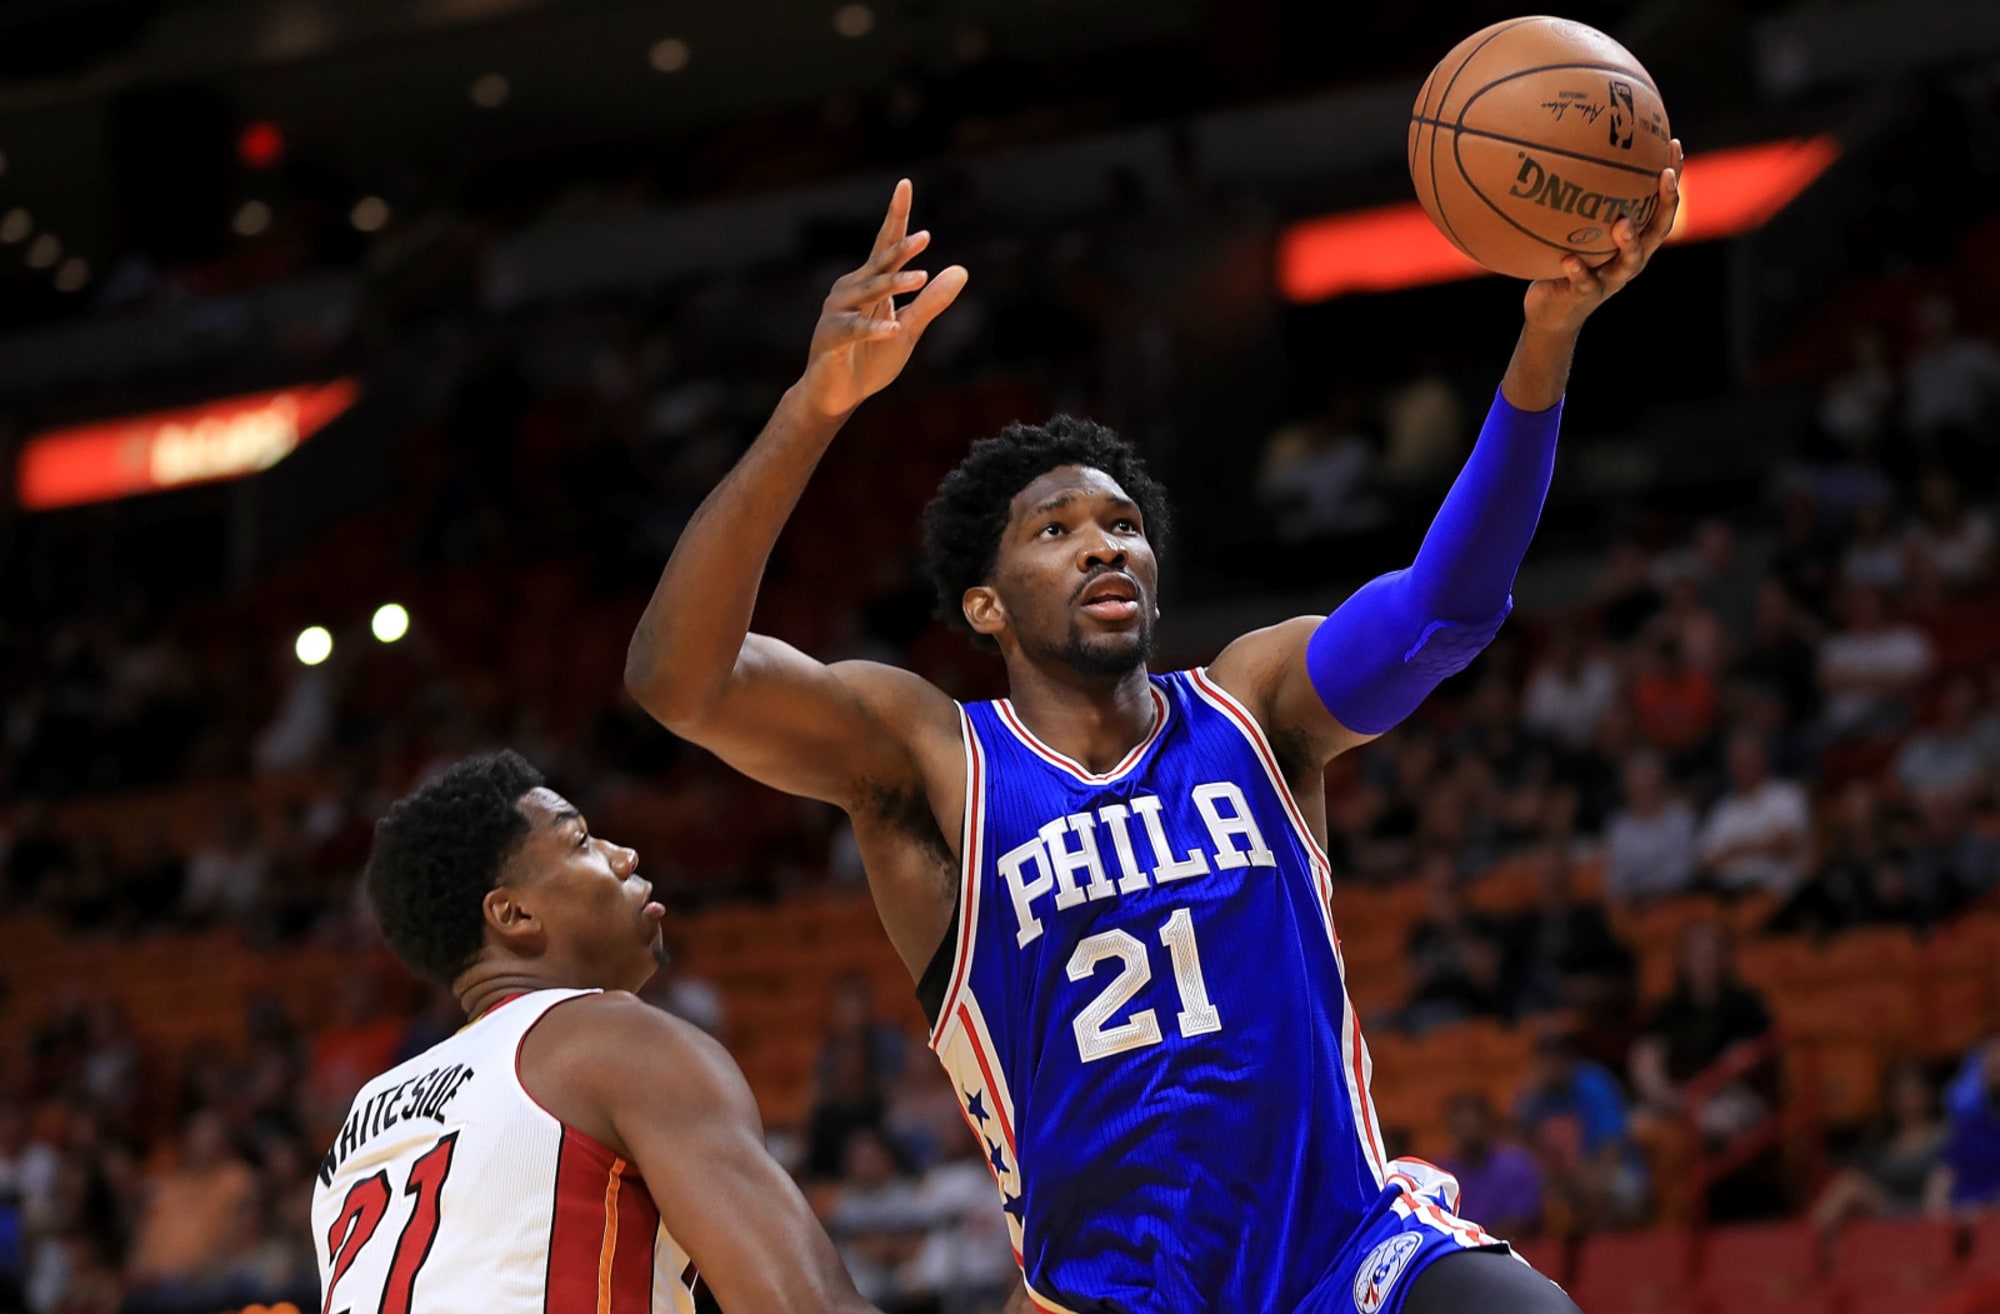 Philadelphia 76ers Joel Embiid is doing good at the NBA Africa game